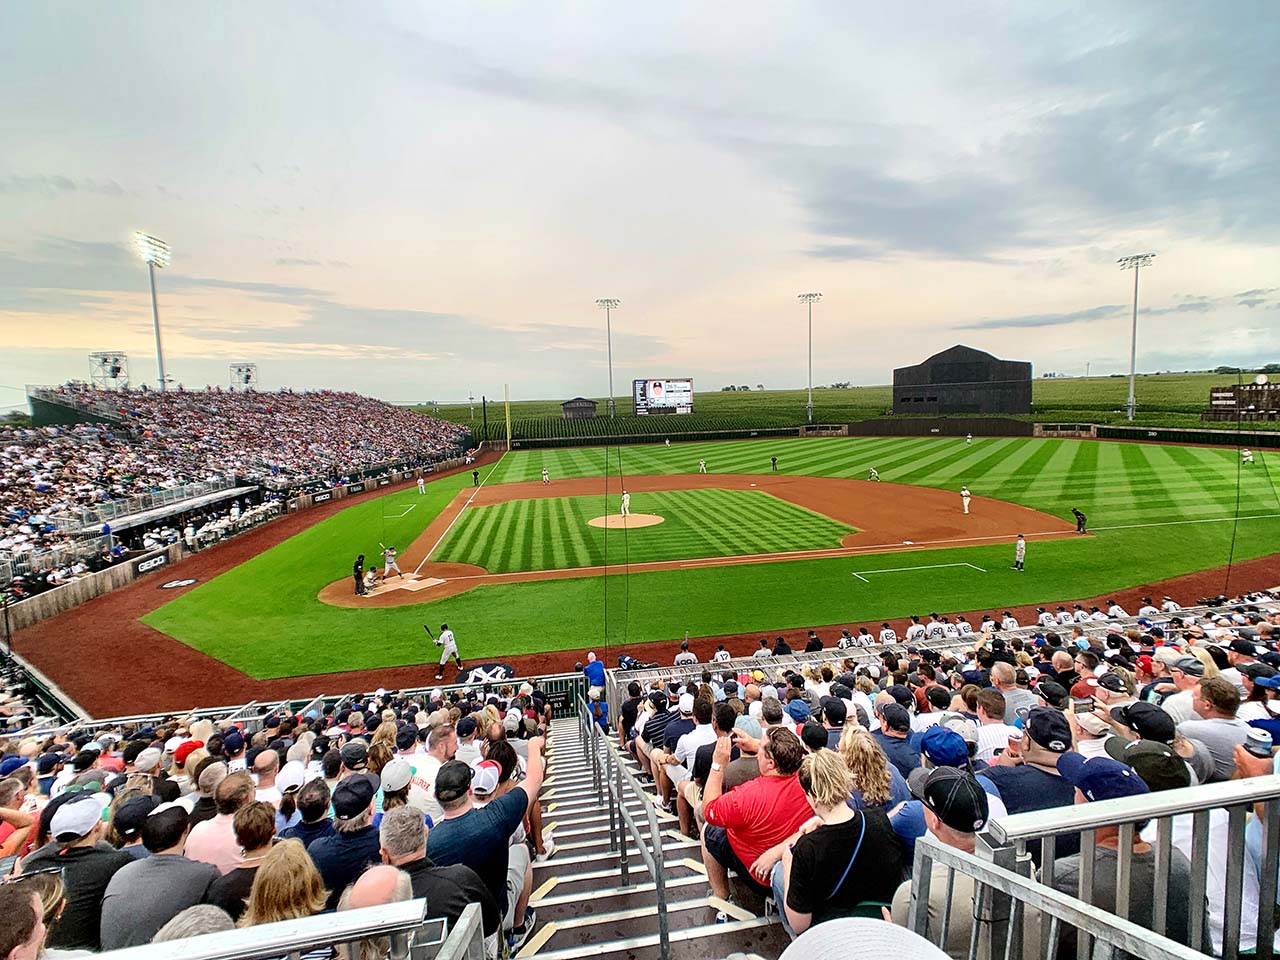 It's Cubs vs. Reds in 2022 Field of Dreams game